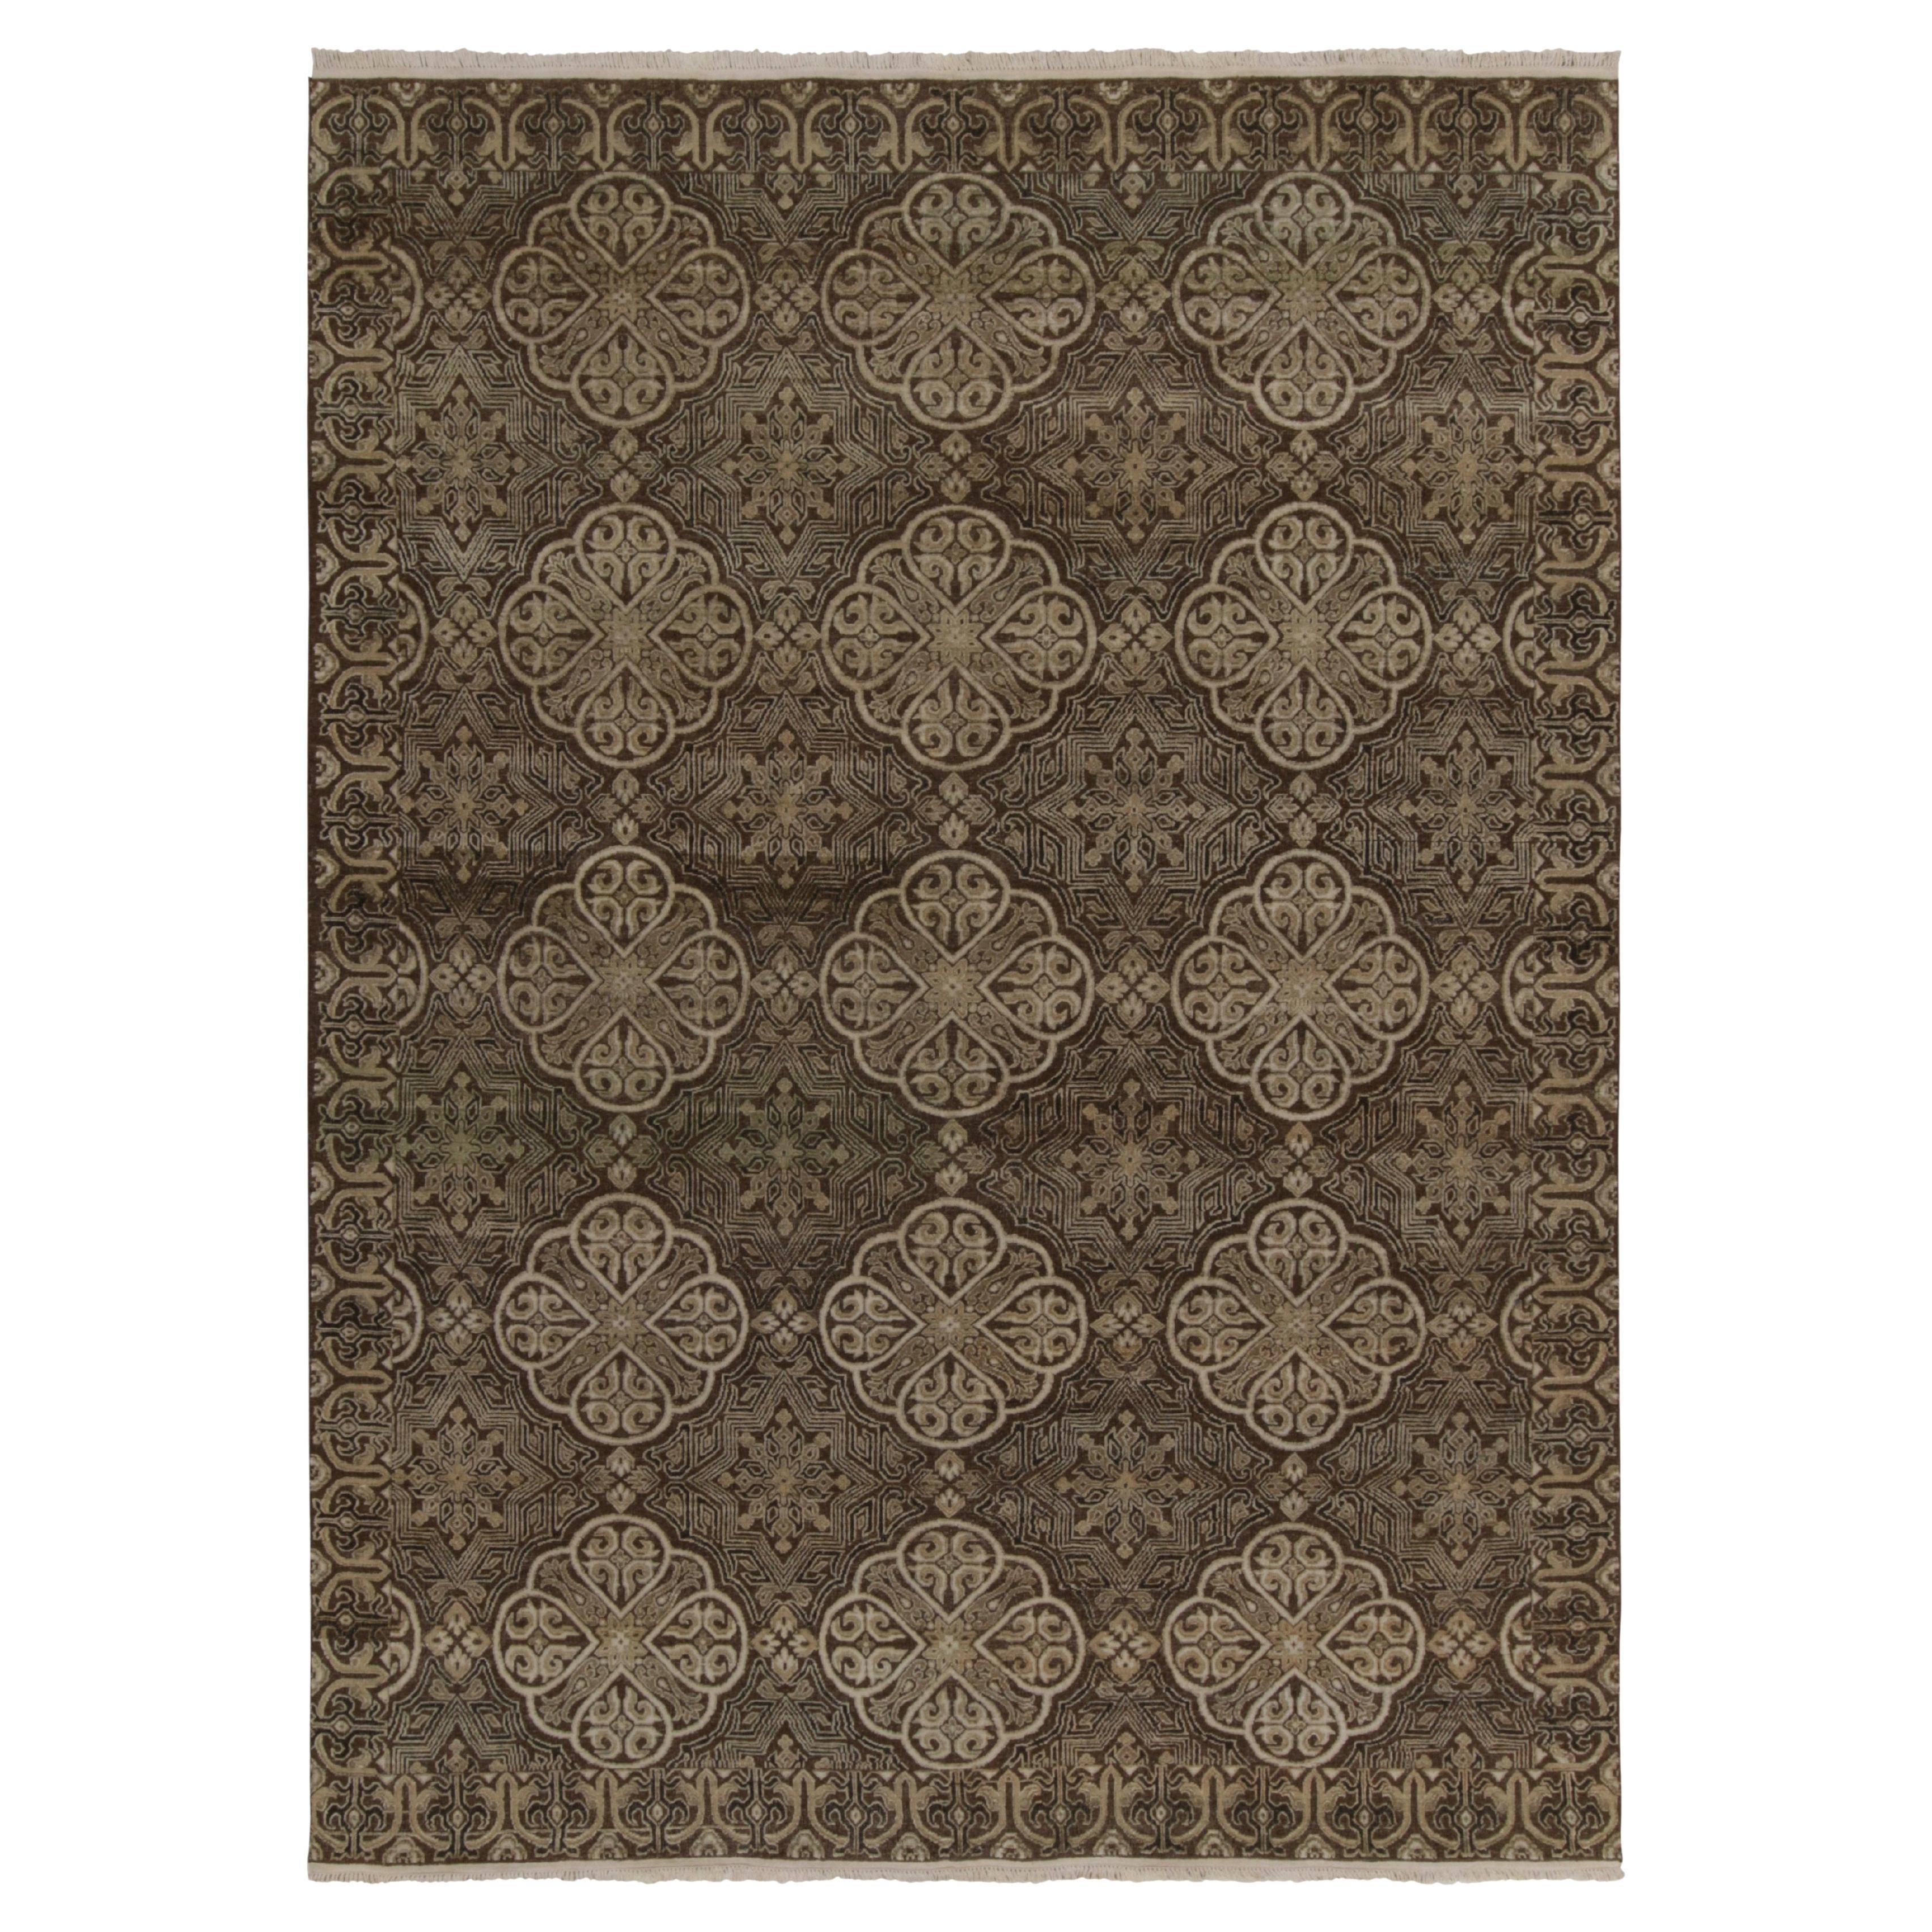 Rug & Kilim’s Spanish Classic style rug in Beige-Brown, Black Geometric Patterns For Sale